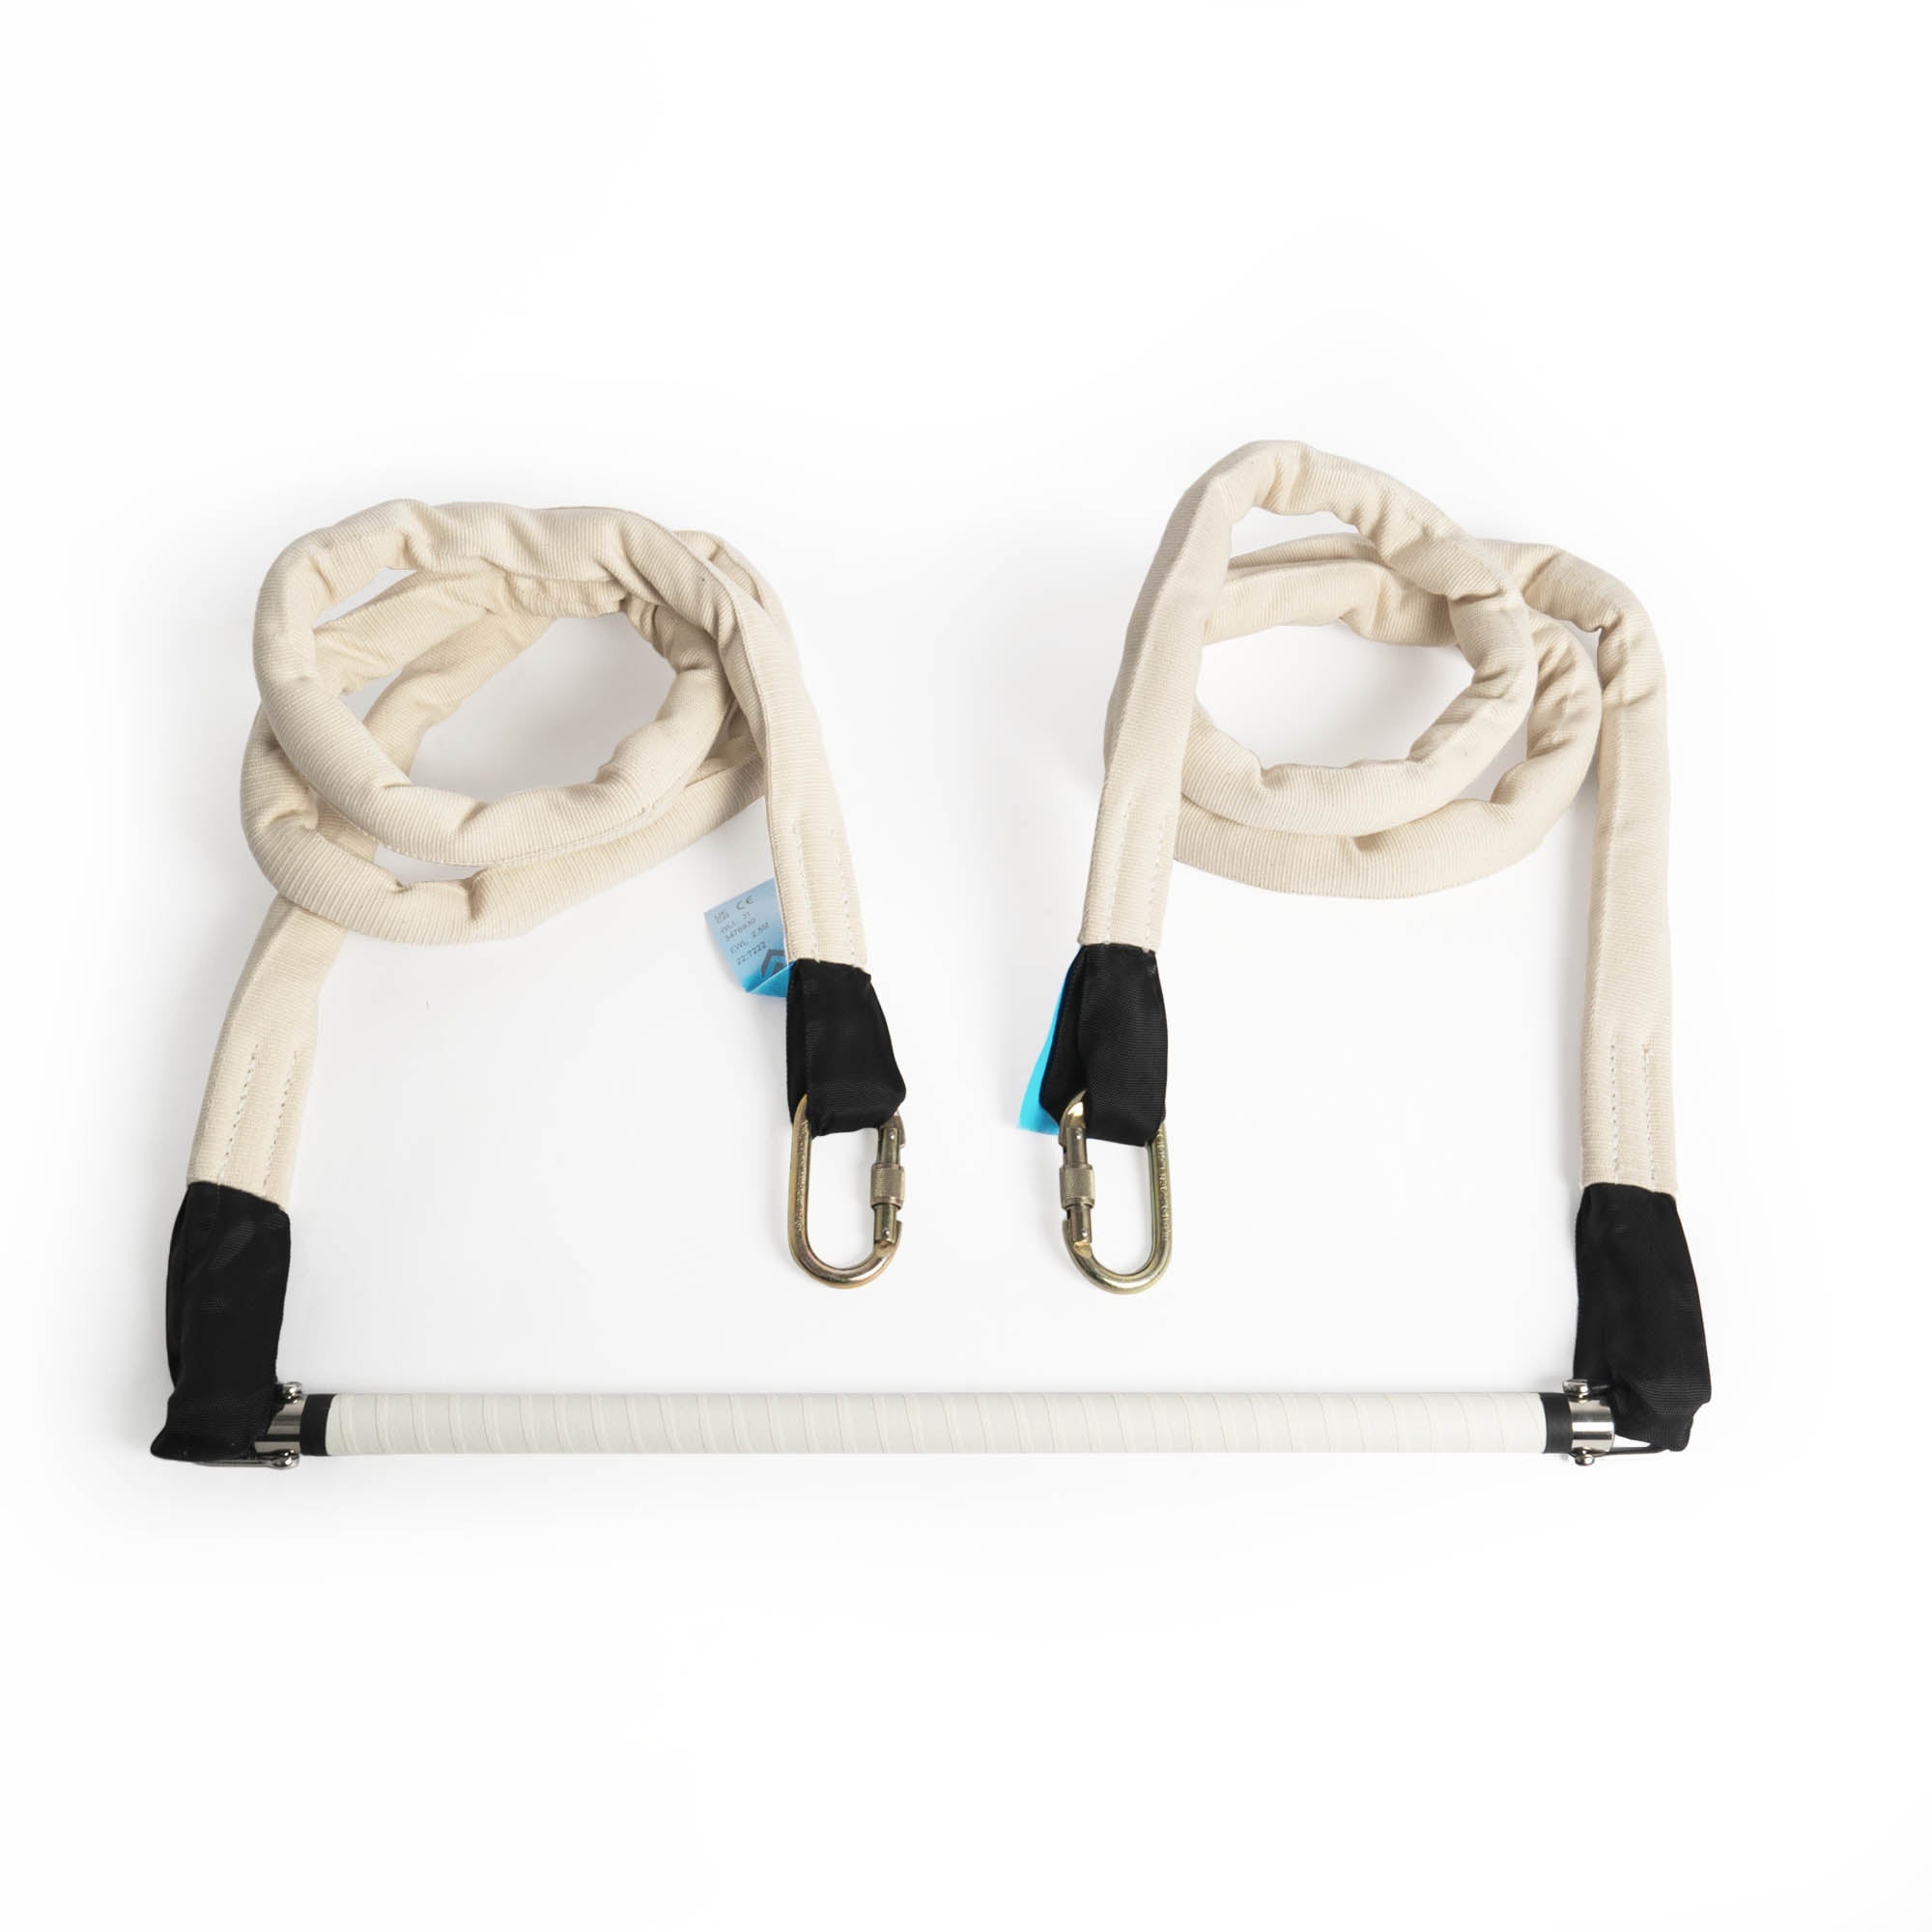 Prodigy cottonsafe shackle trapeze with ropes coiled up